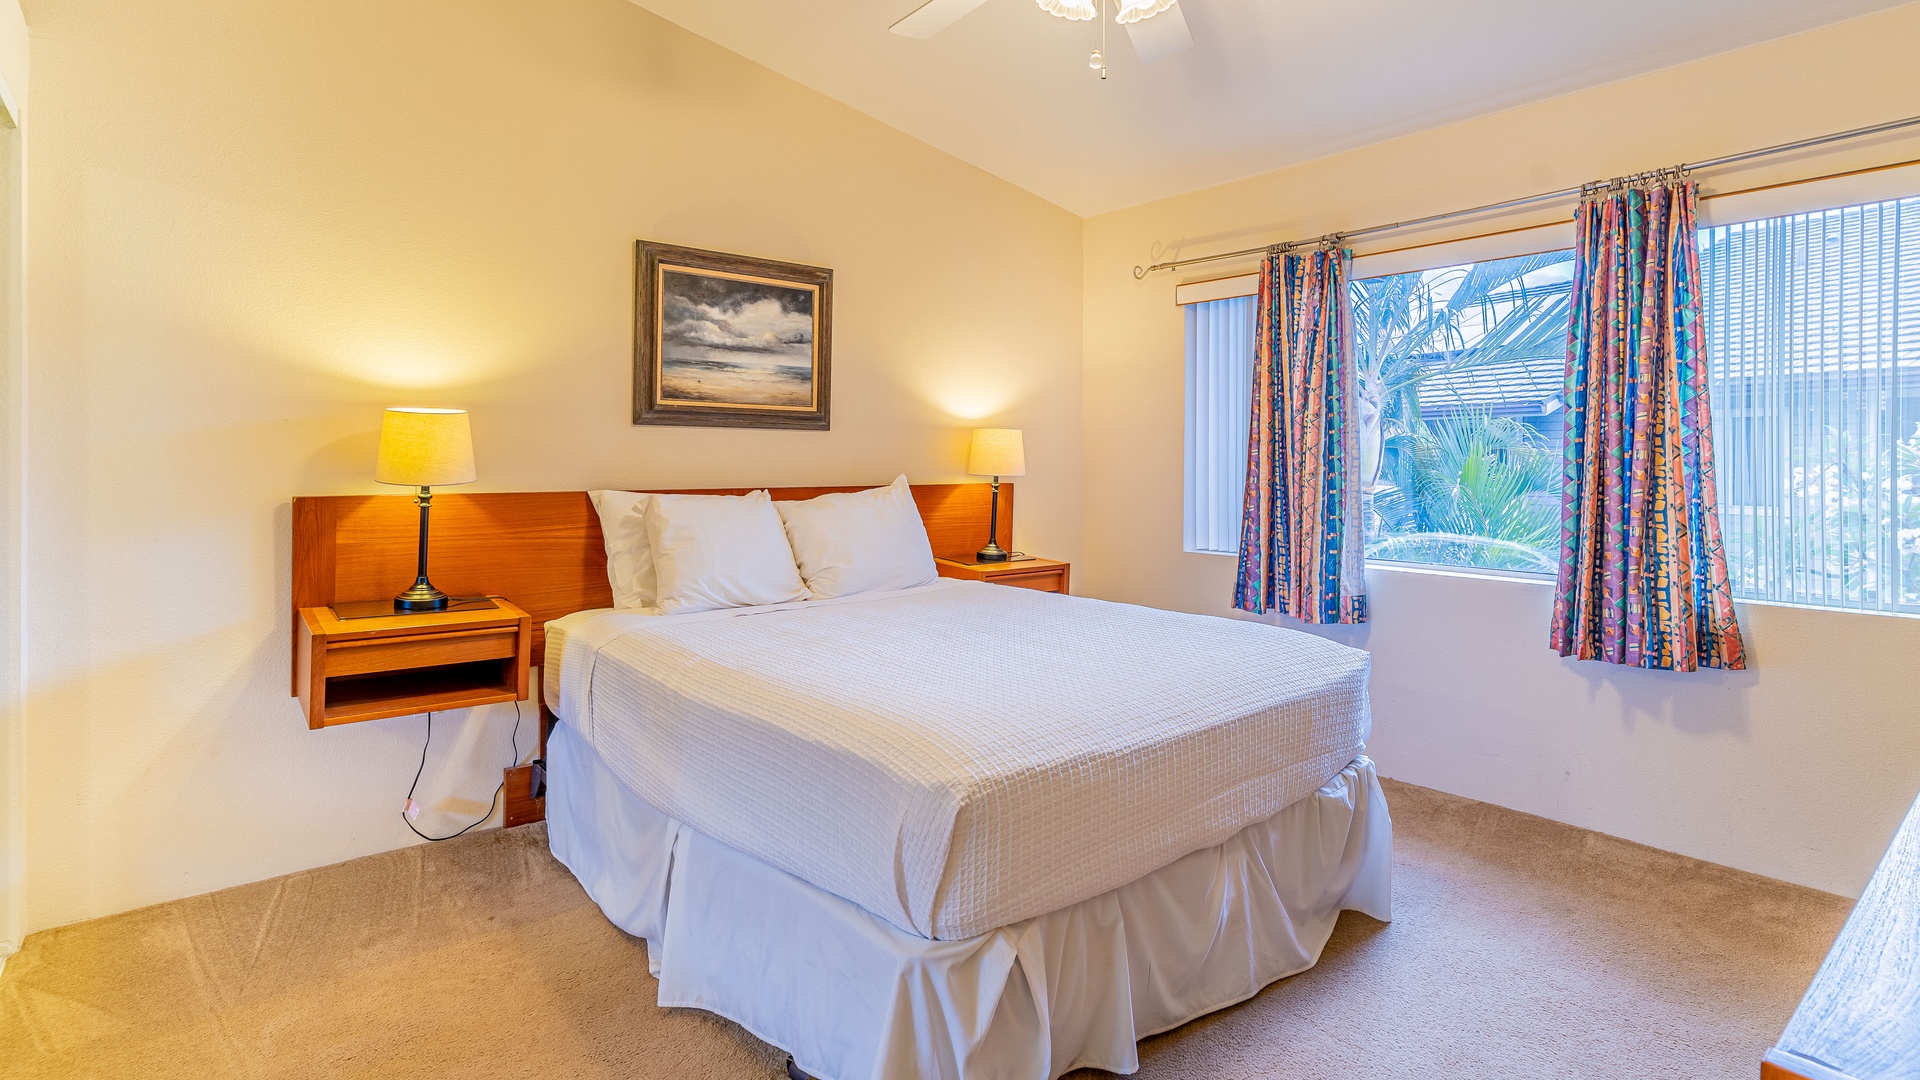 Kapolei Vacation Rentals, Fairways at Ko Olina 33F - The primary guest bedroom is comfortable and spacious for a restful slumber.